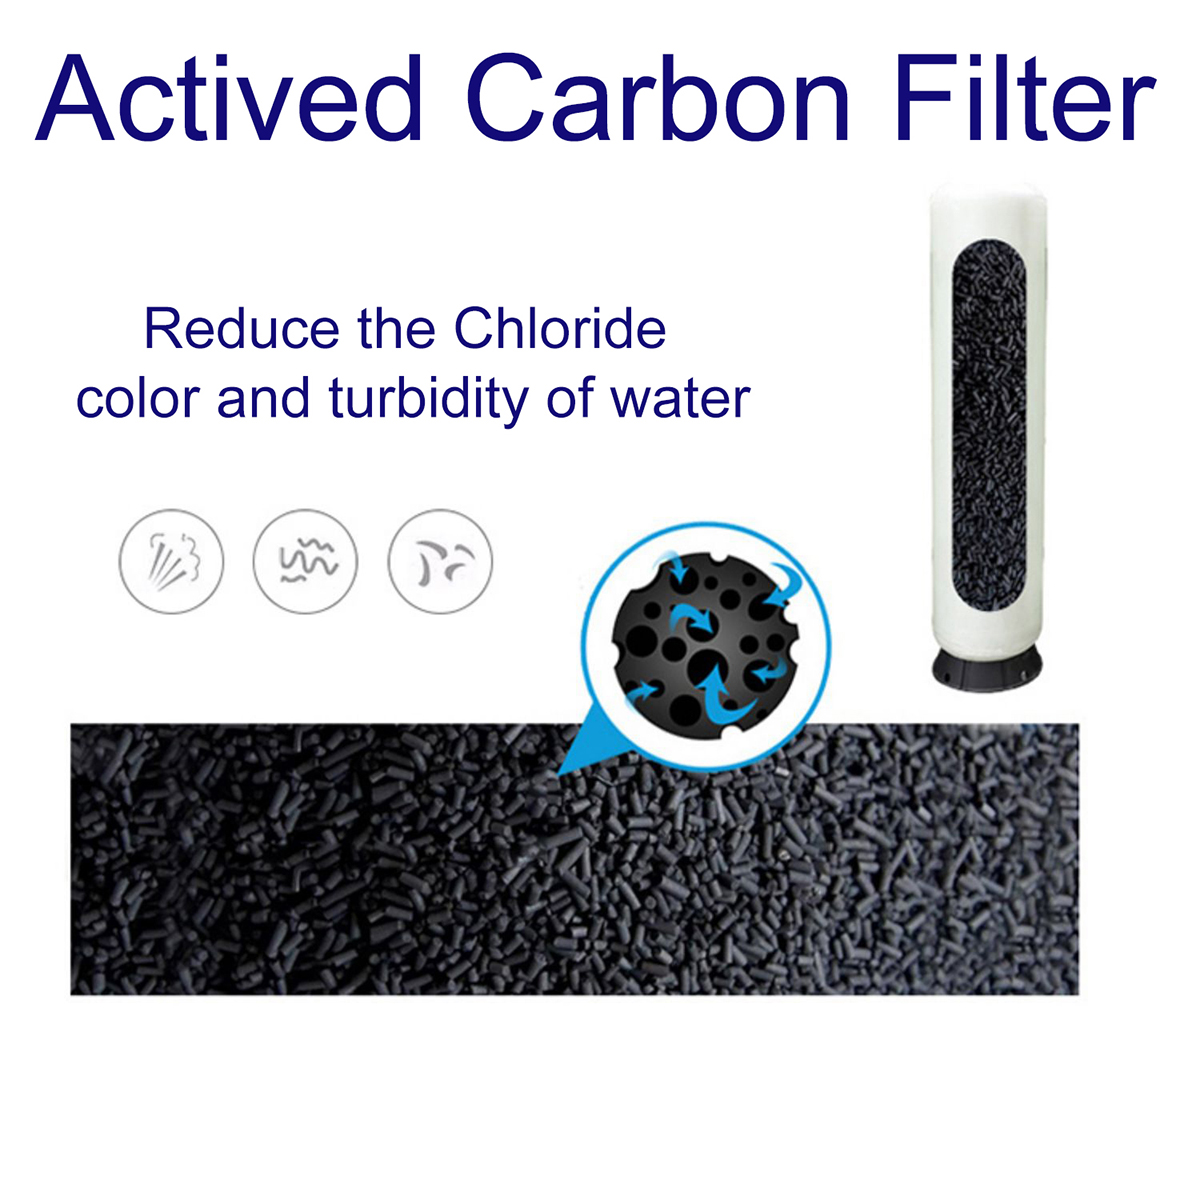 active carbon filter of the RO water filter machine